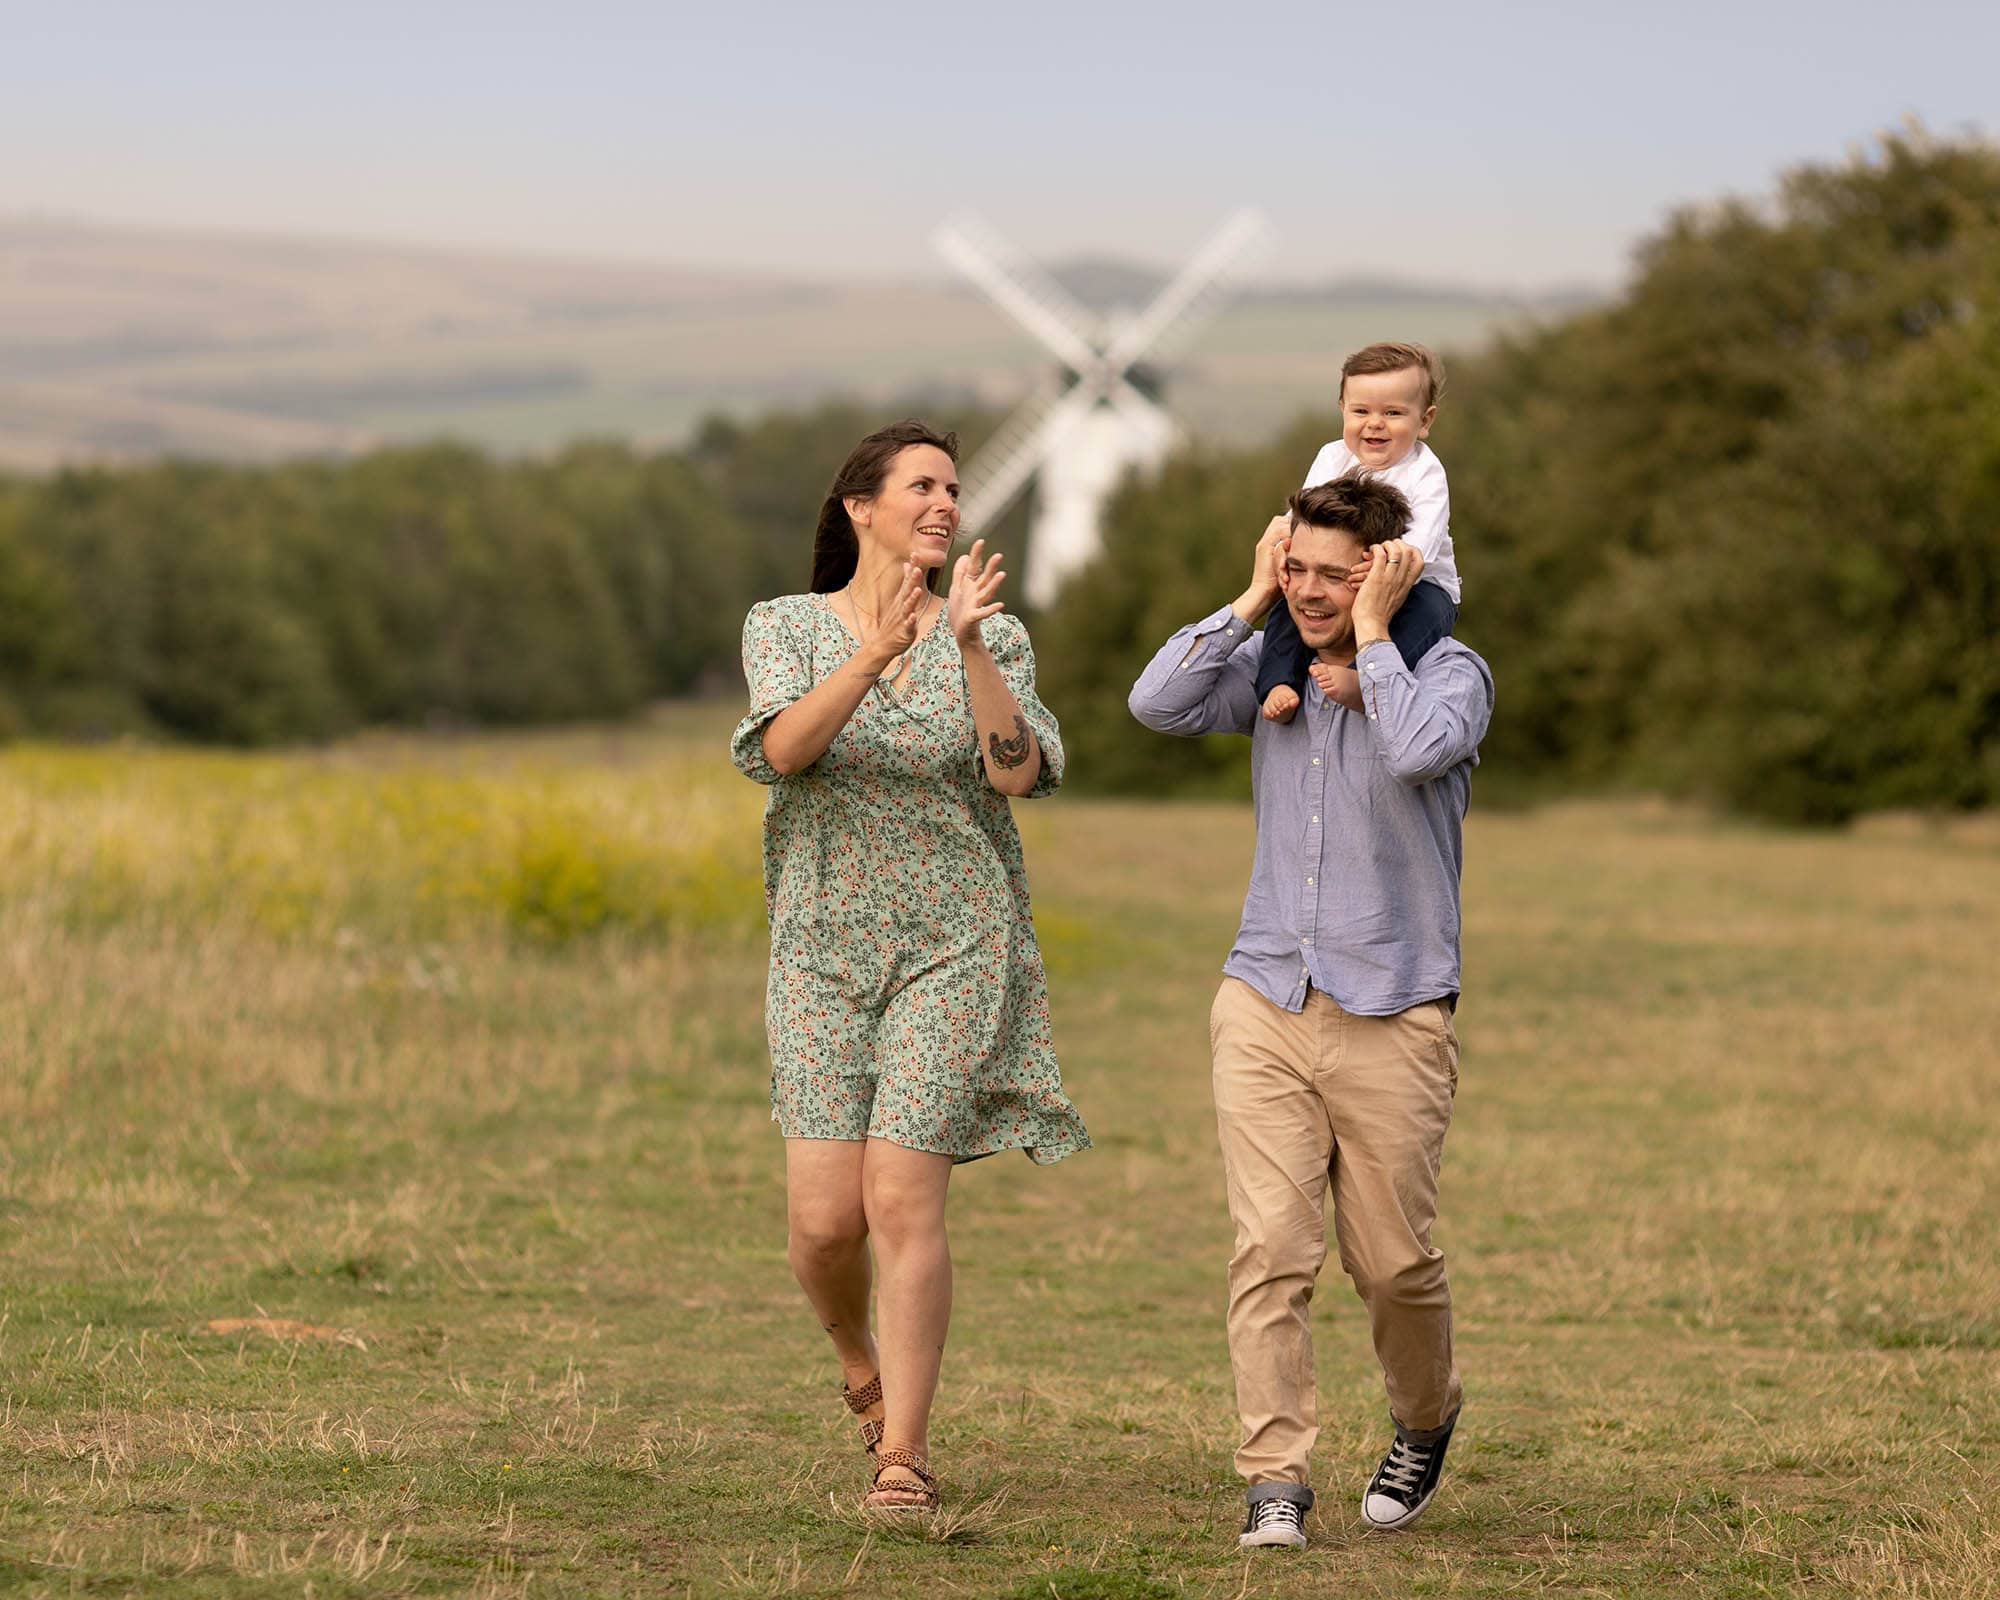 Couple walking in the countryside. dad has baby pn his shoulders. A windmill can be seen in the background. Image taken during a family photography session in Glasgow